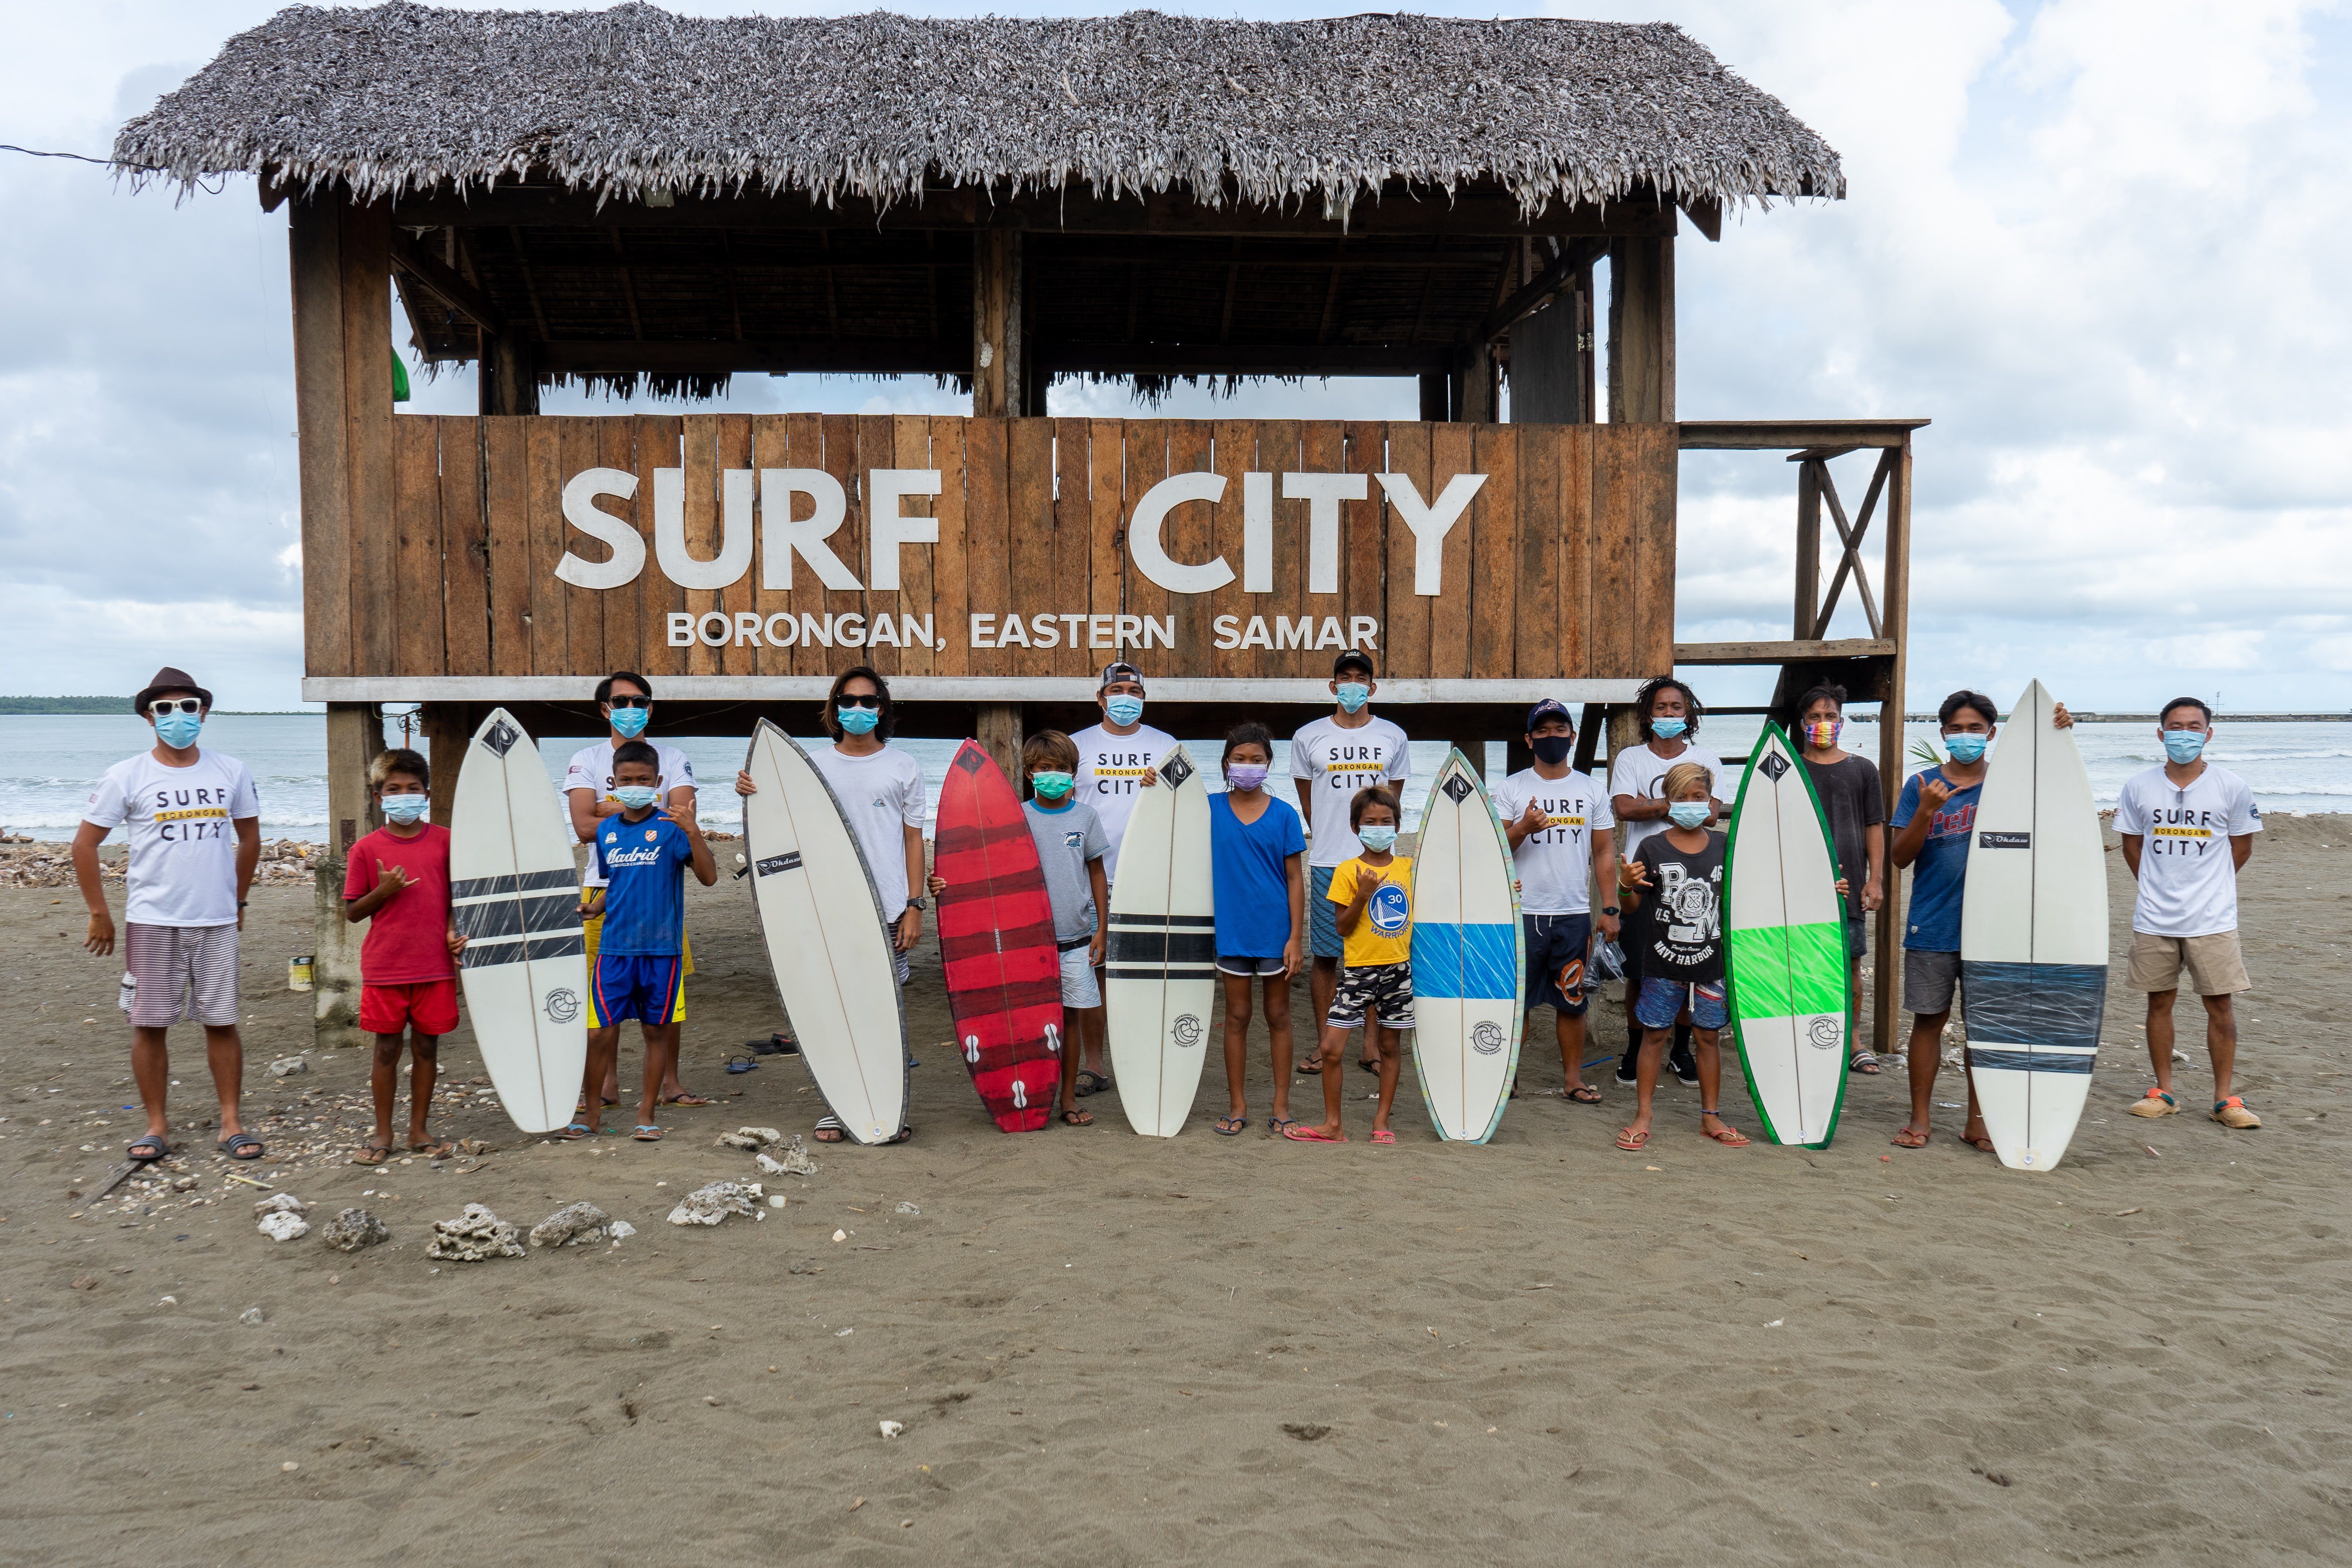 Eastern Samar surf club gives mentorship, equipment to young surfers in Borongan